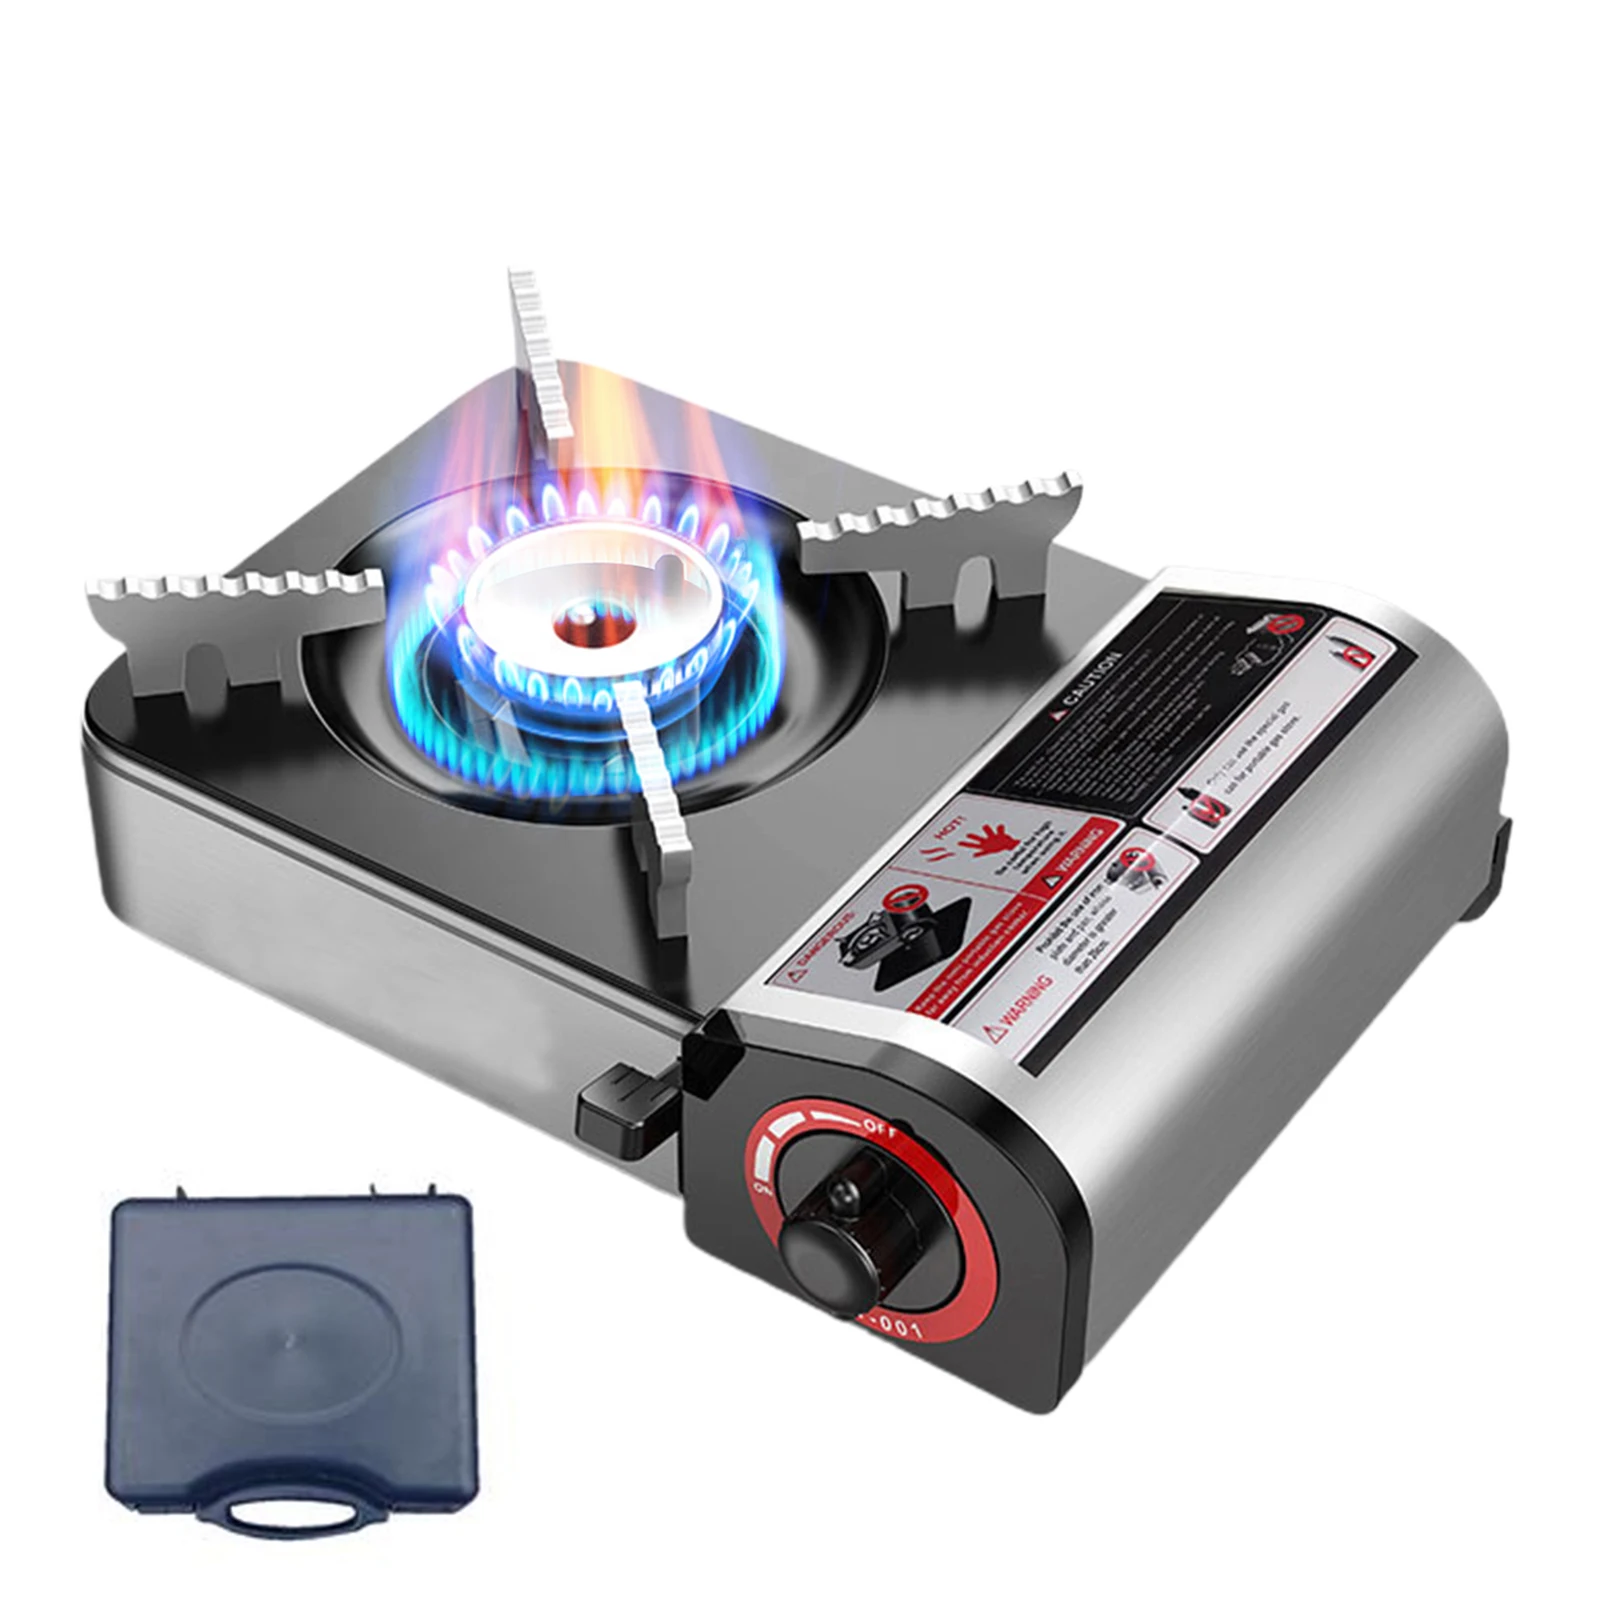 

Cassette Stove Portable Mini Cassette Furnace Single Burner Stove Camping And Backpacking Essentials Piezo Electric Ignition